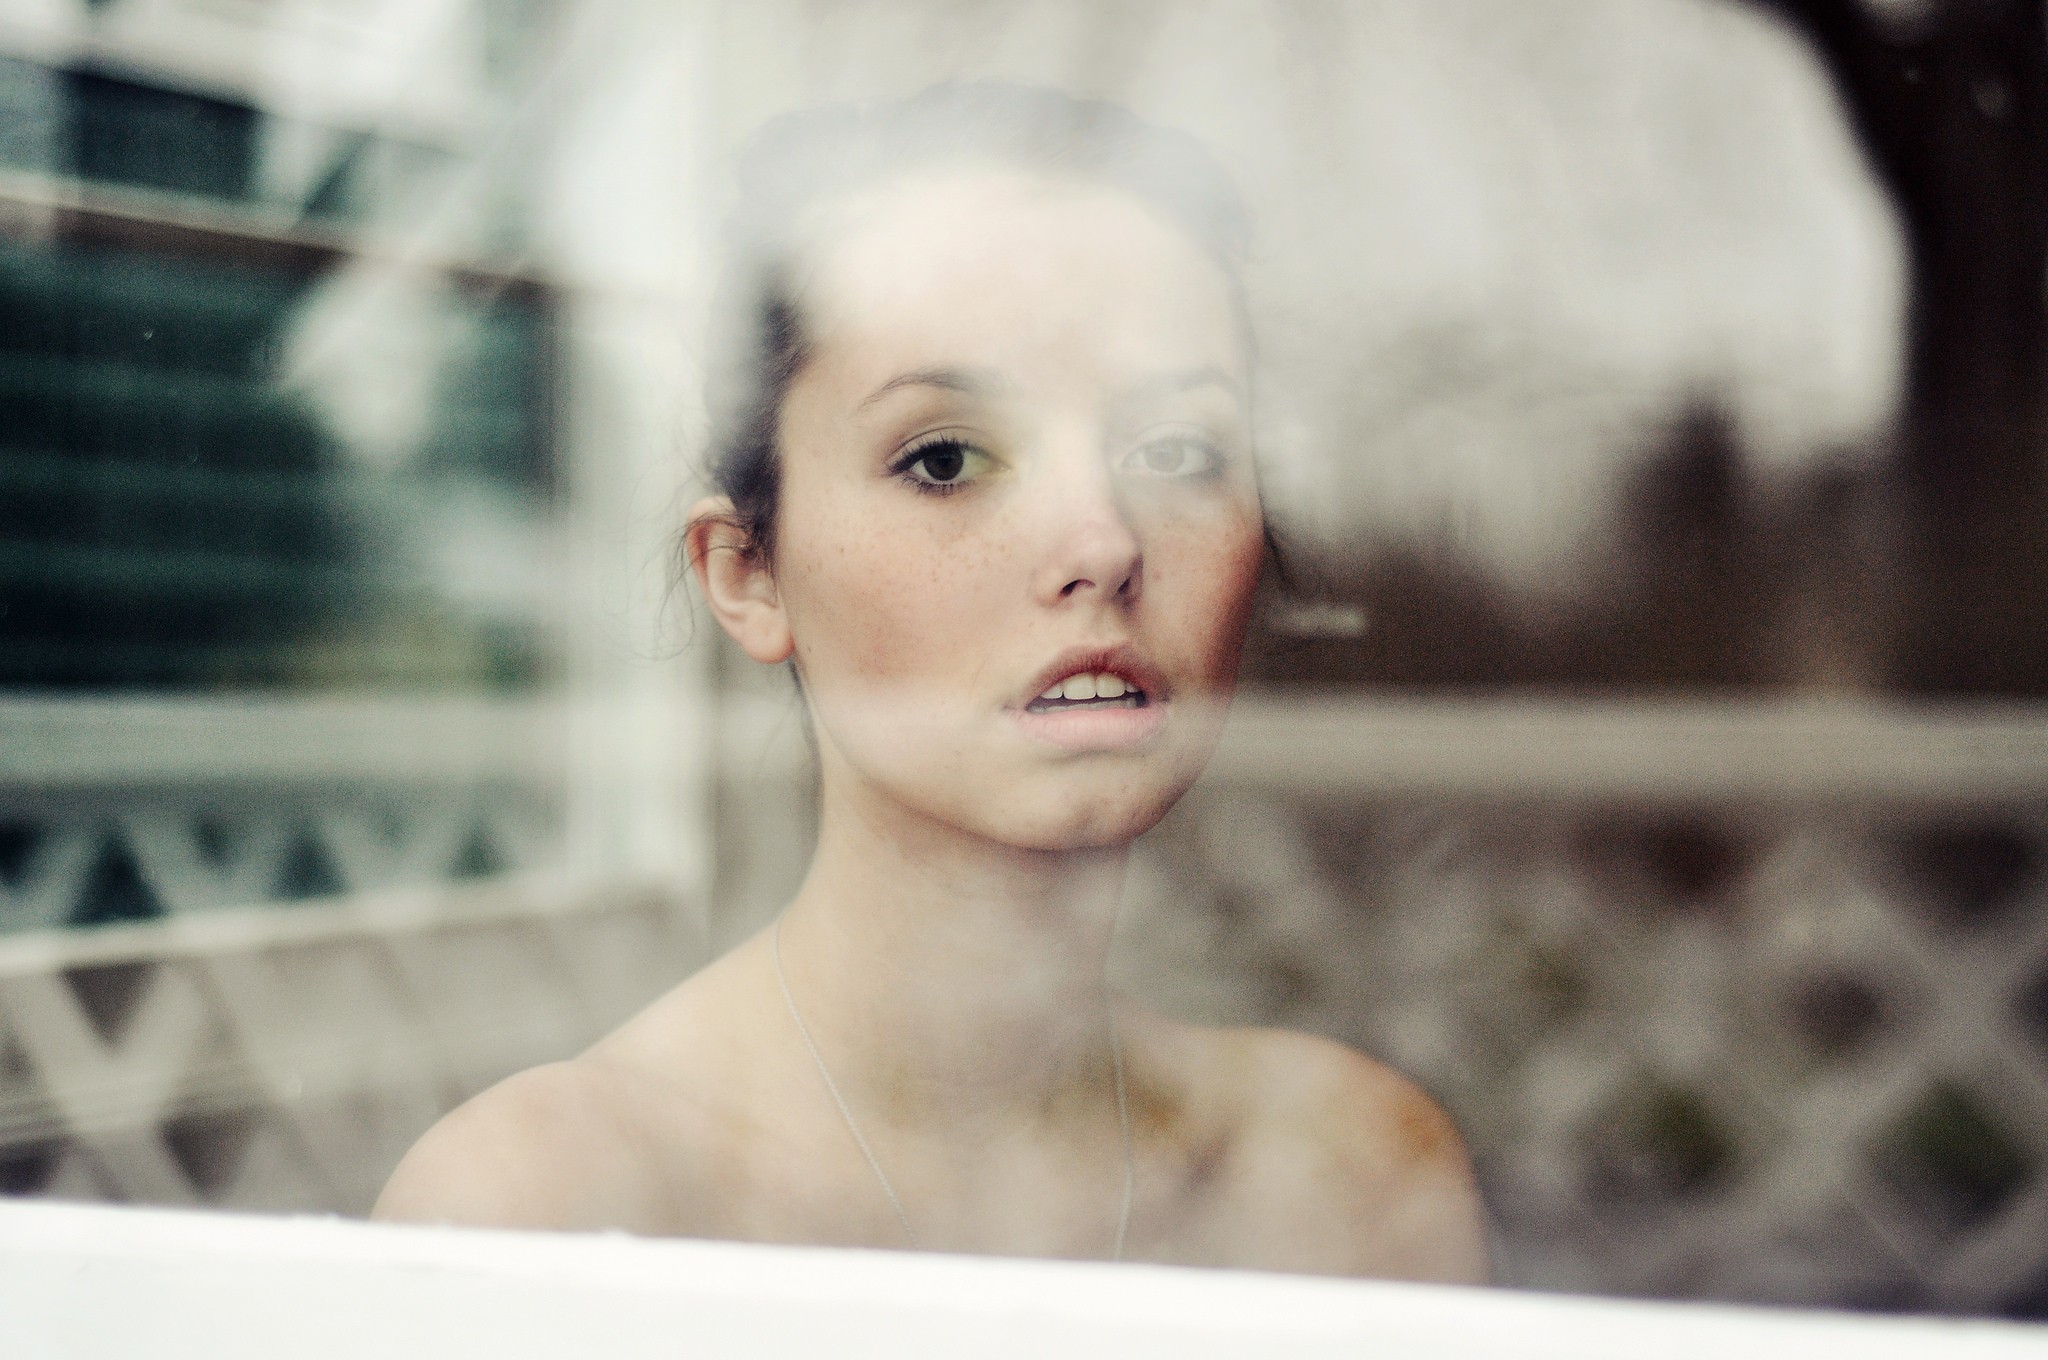 Women Model Skye Thompson Ruby James Looking Out Window Looking At Viewer Open Mouth 2048x1360